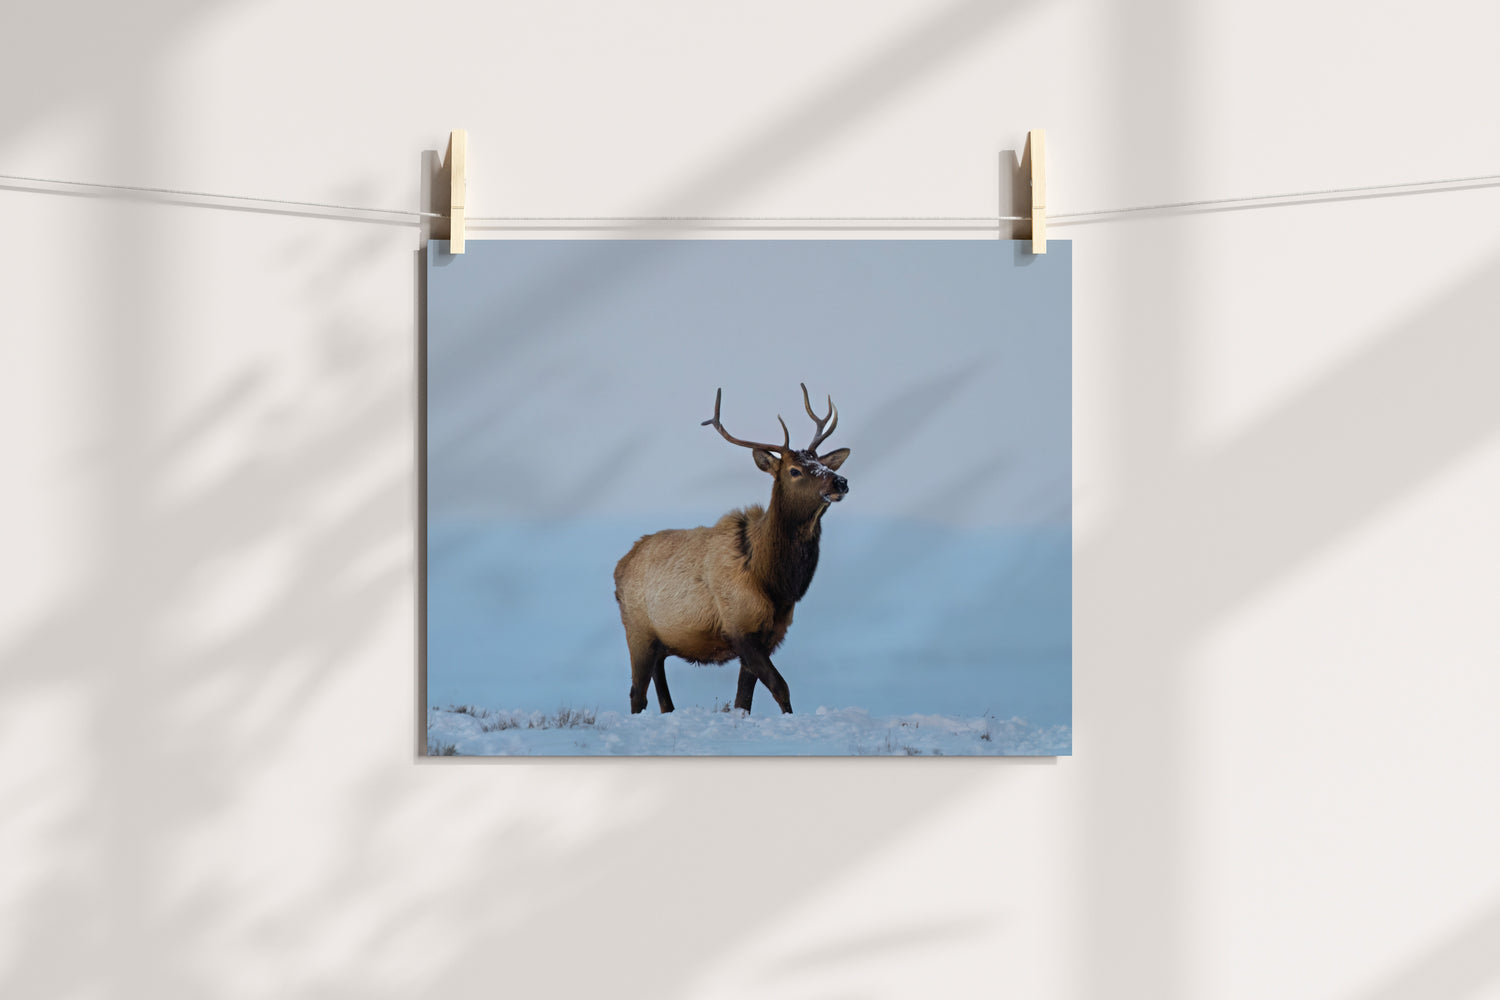 Young Bull Elk in Winter - The Overland Diaries